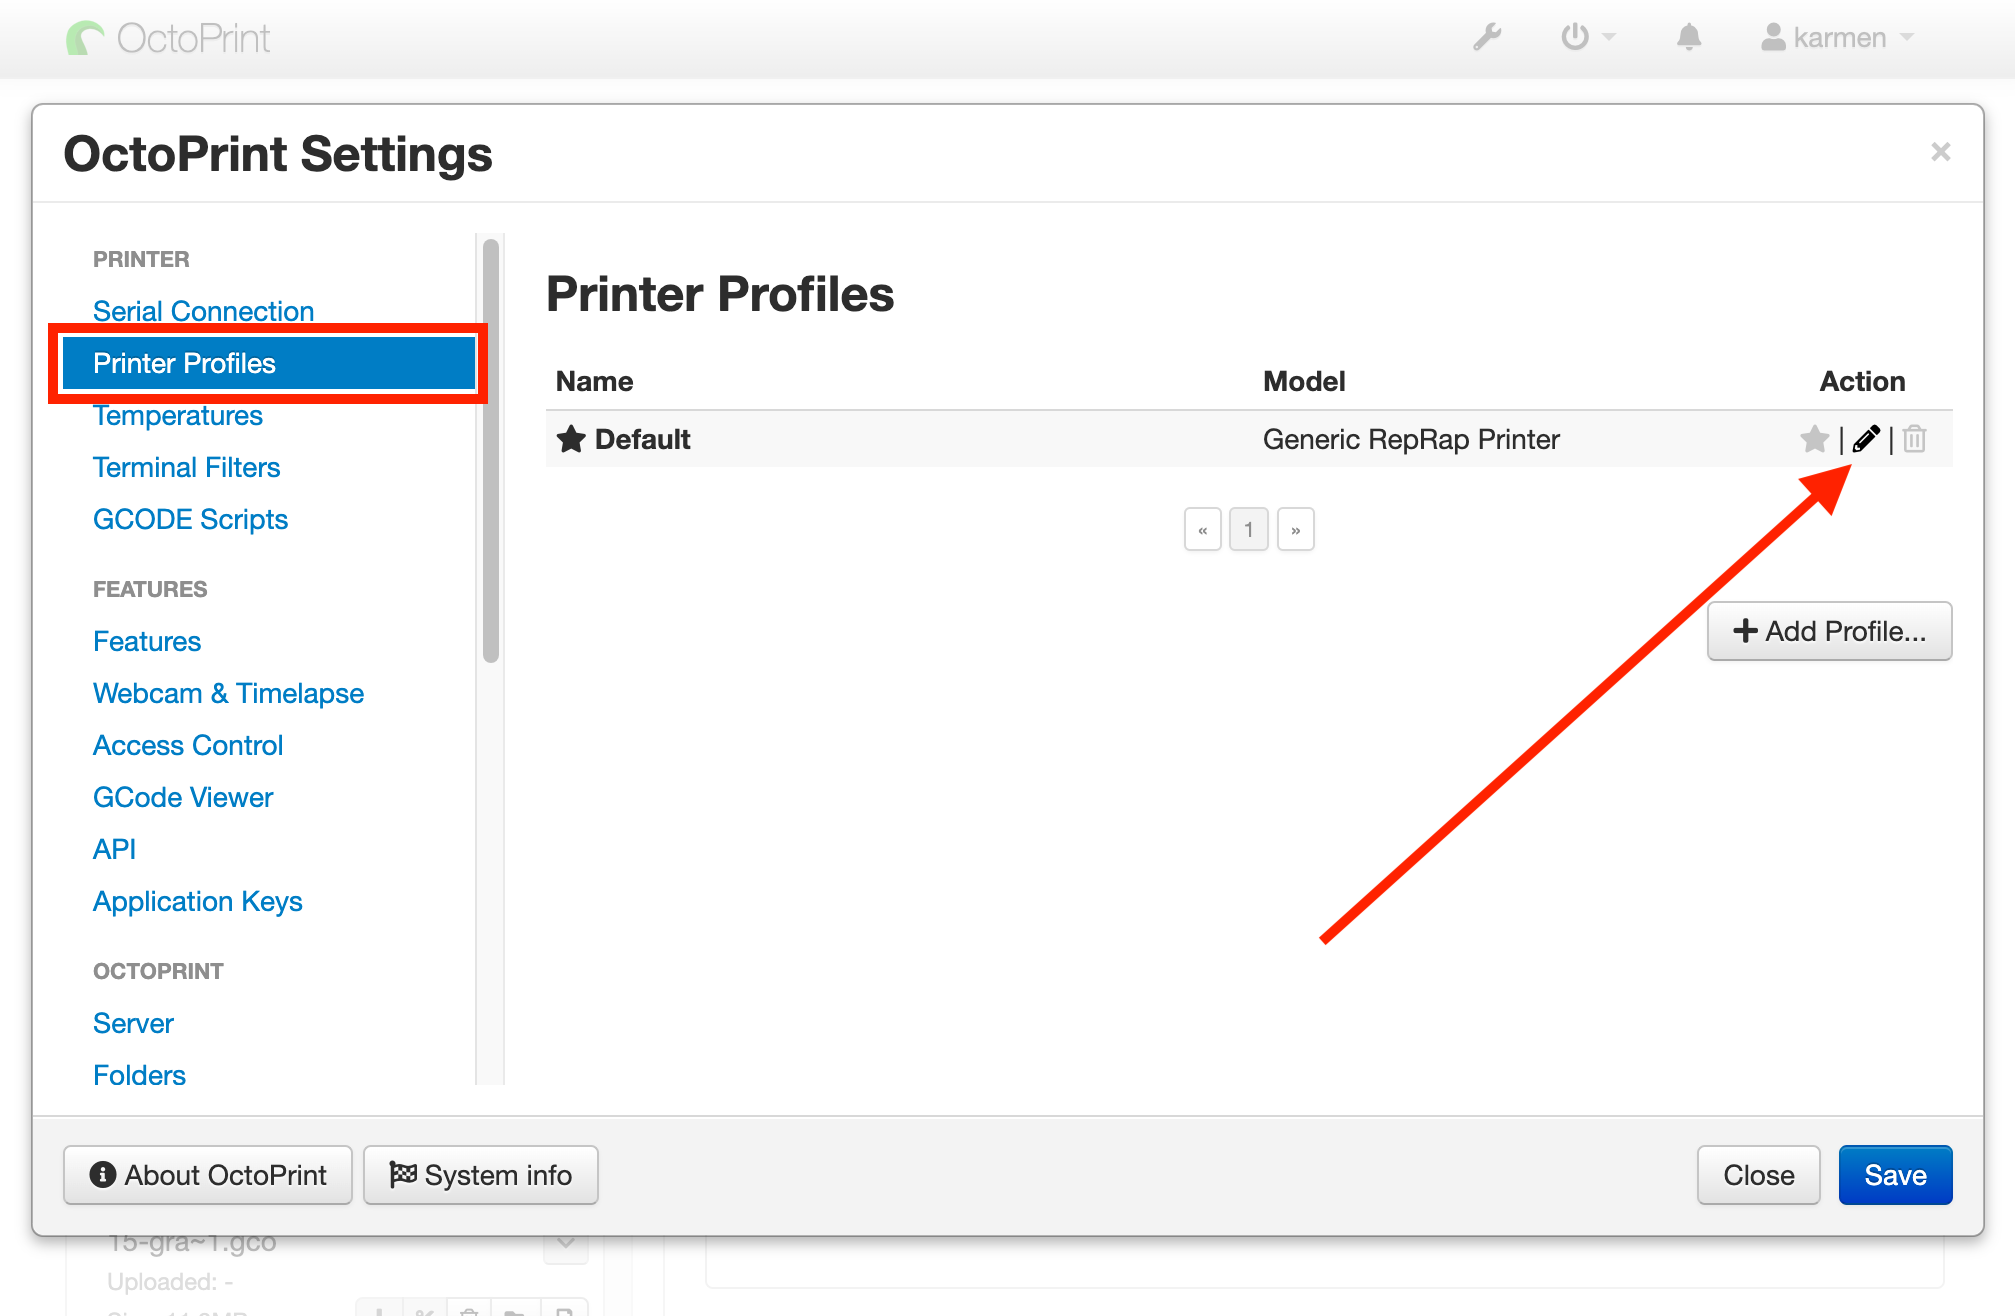 octoprint-profile-edit-icon.png